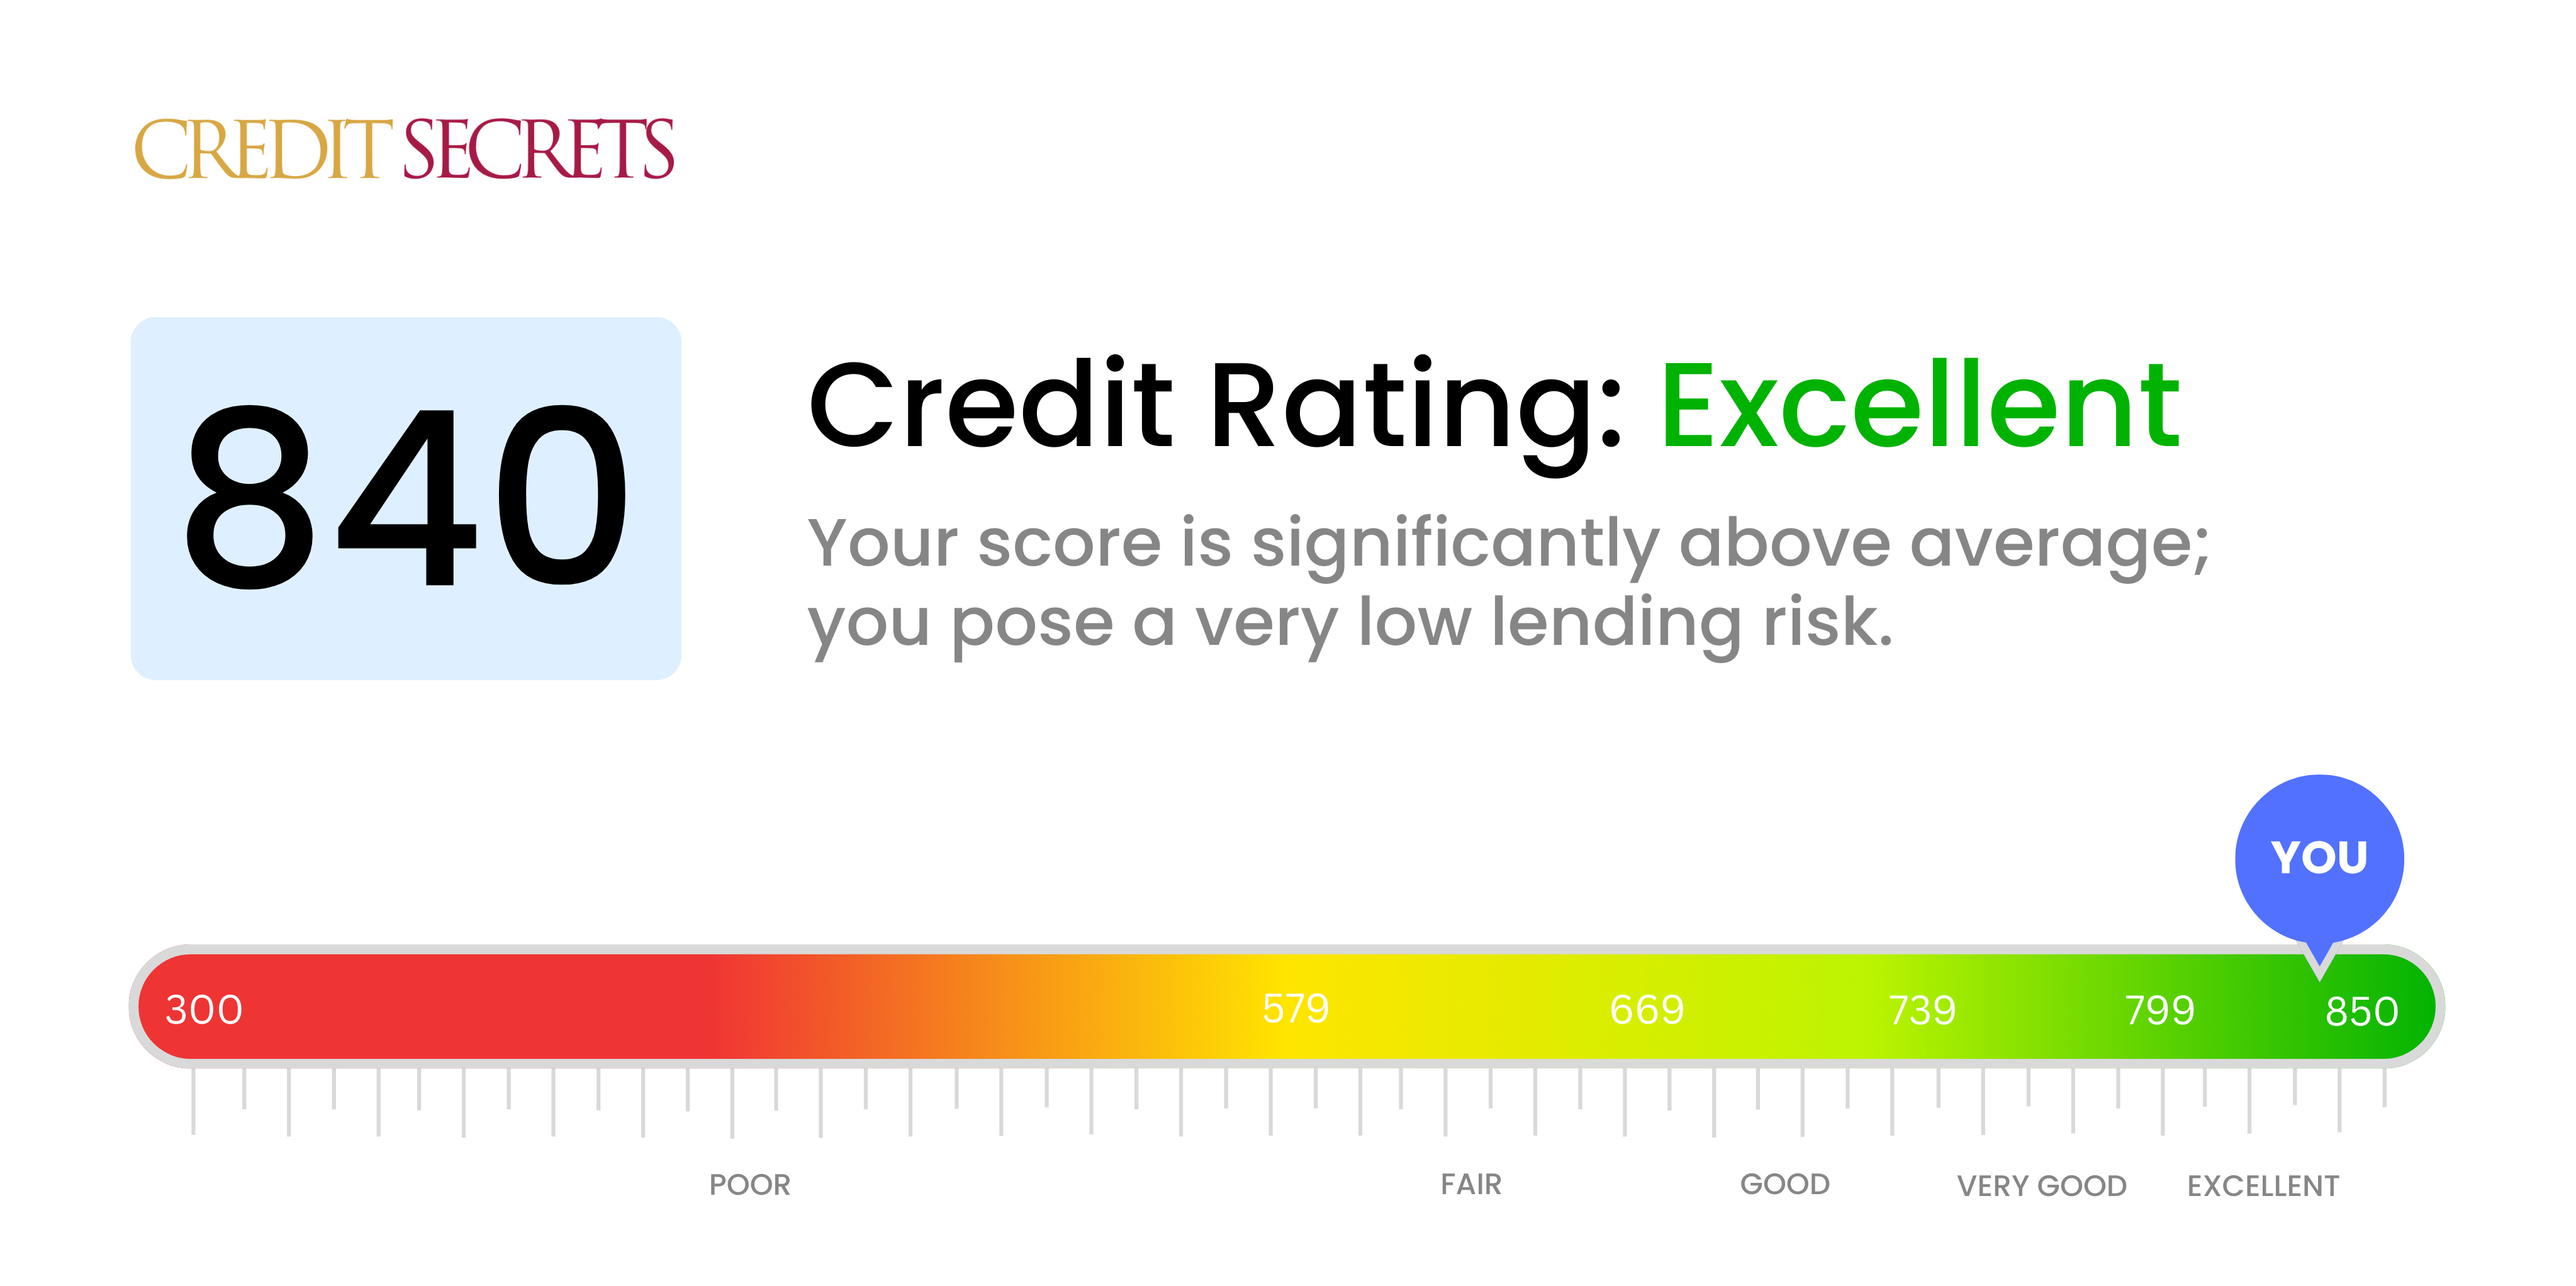 Is 840 a good credit score?